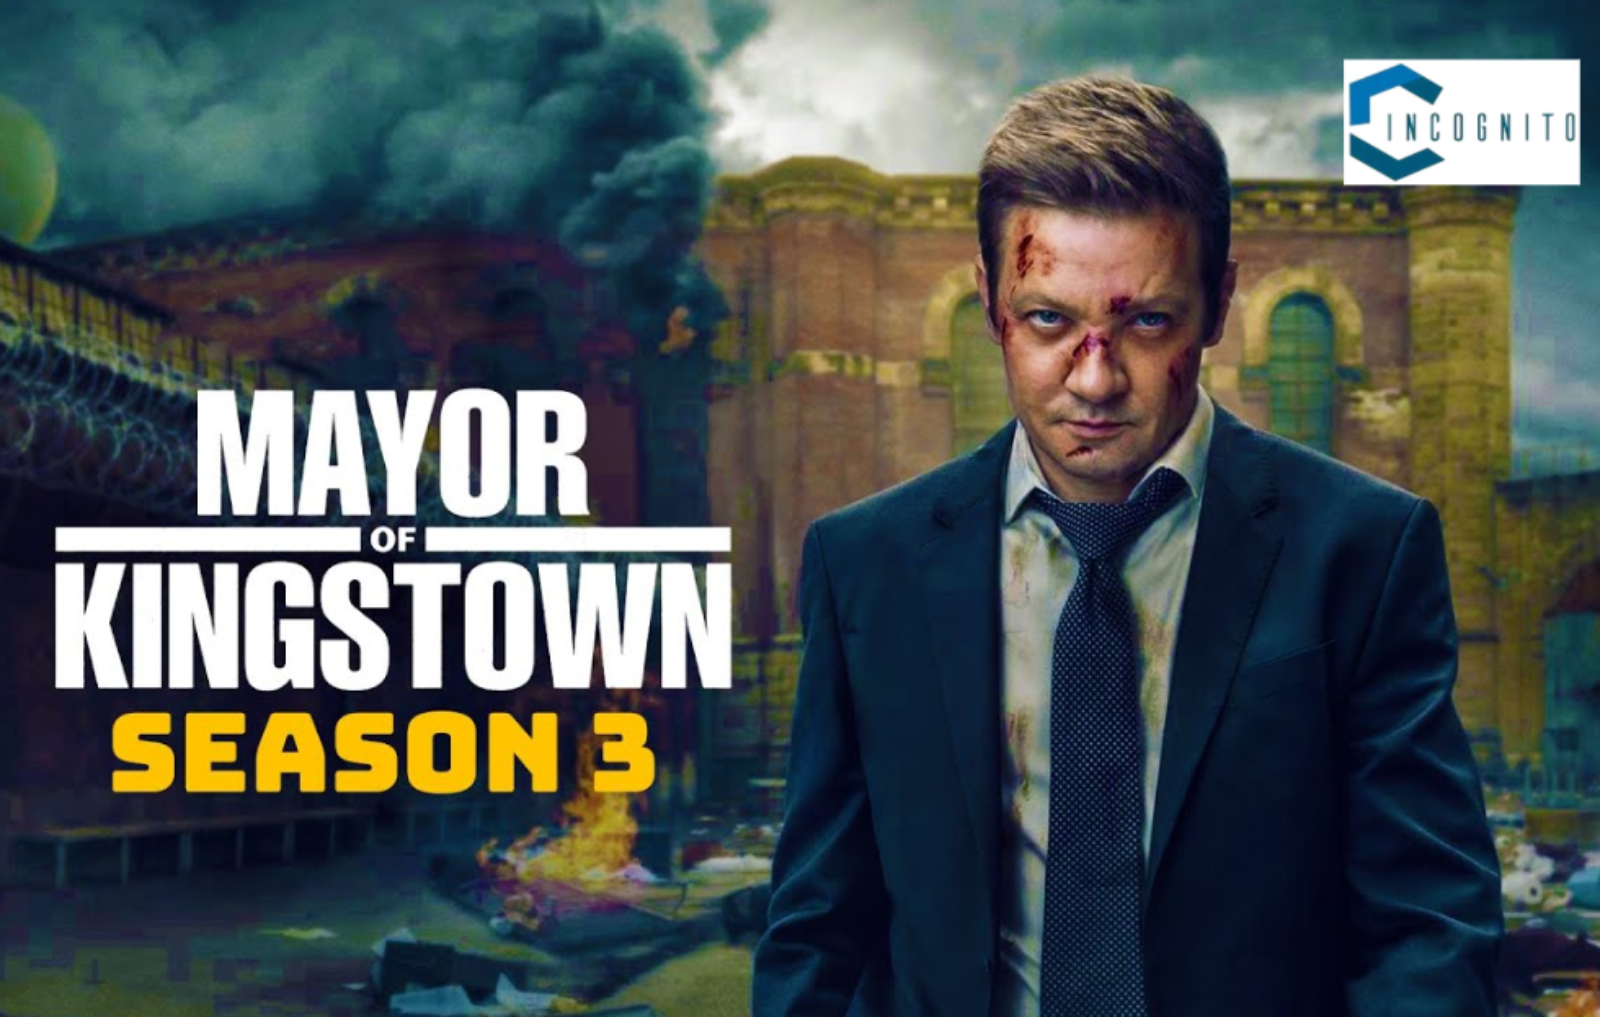 Mayor Of Kingstown Season 3: What Can We Expect In The Last Three Episodes Including Finale?